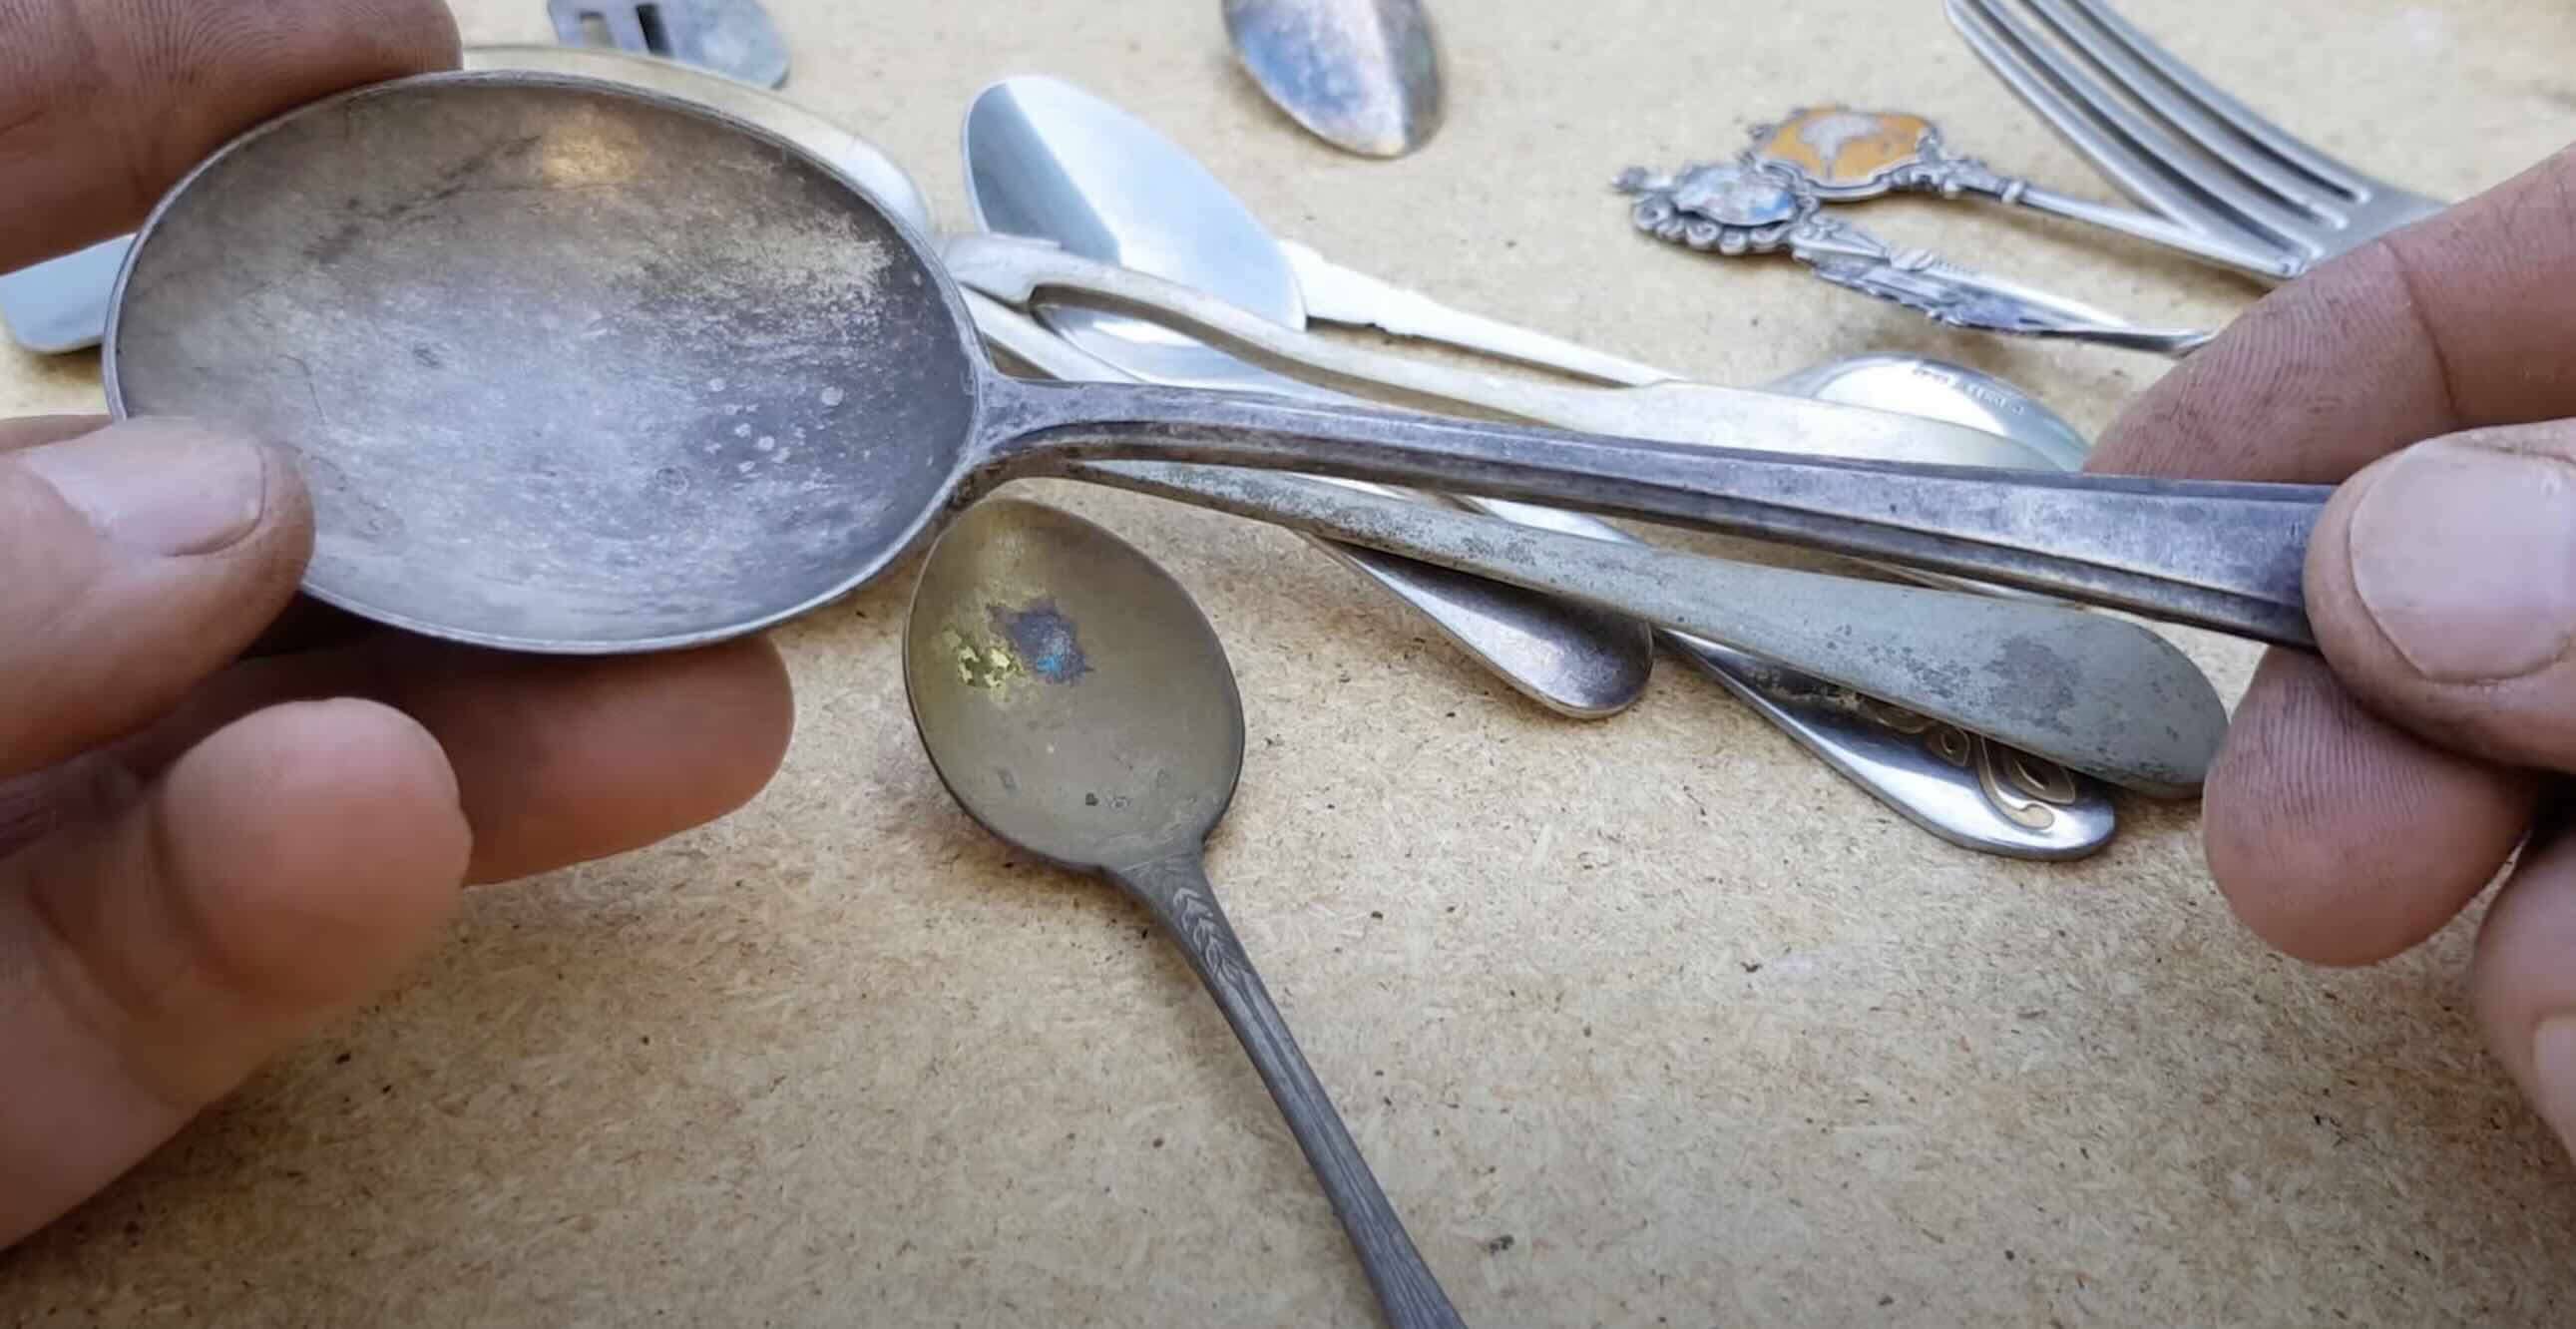 What To Do With Old Silver Silverware